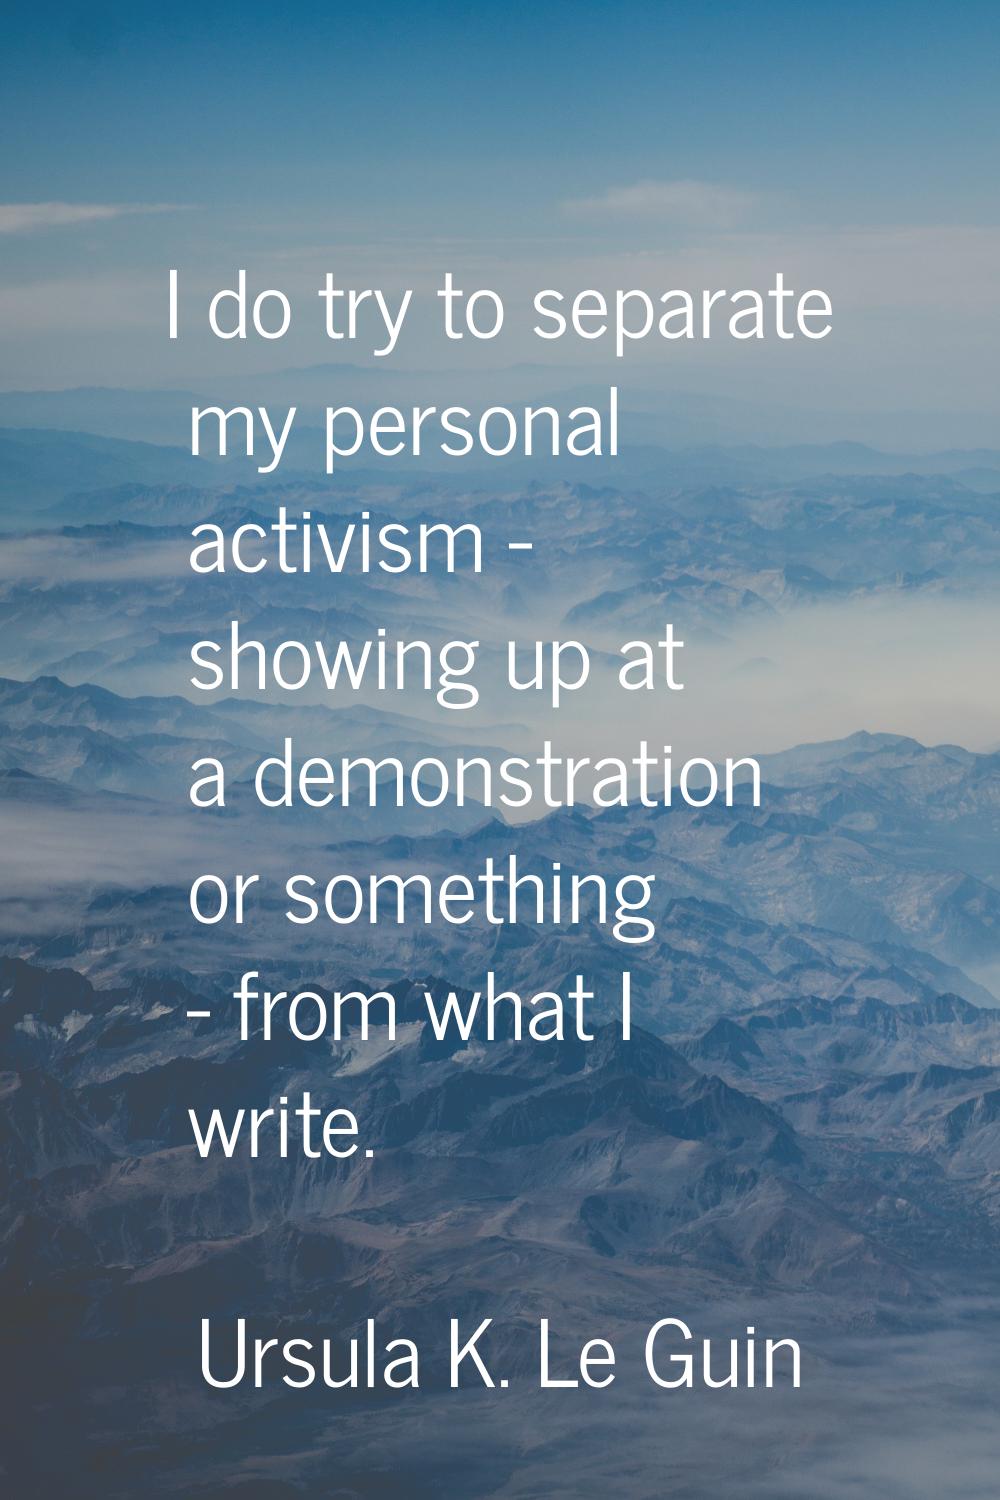 I do try to separate my personal activism - showing up at a demonstration or something - from what 